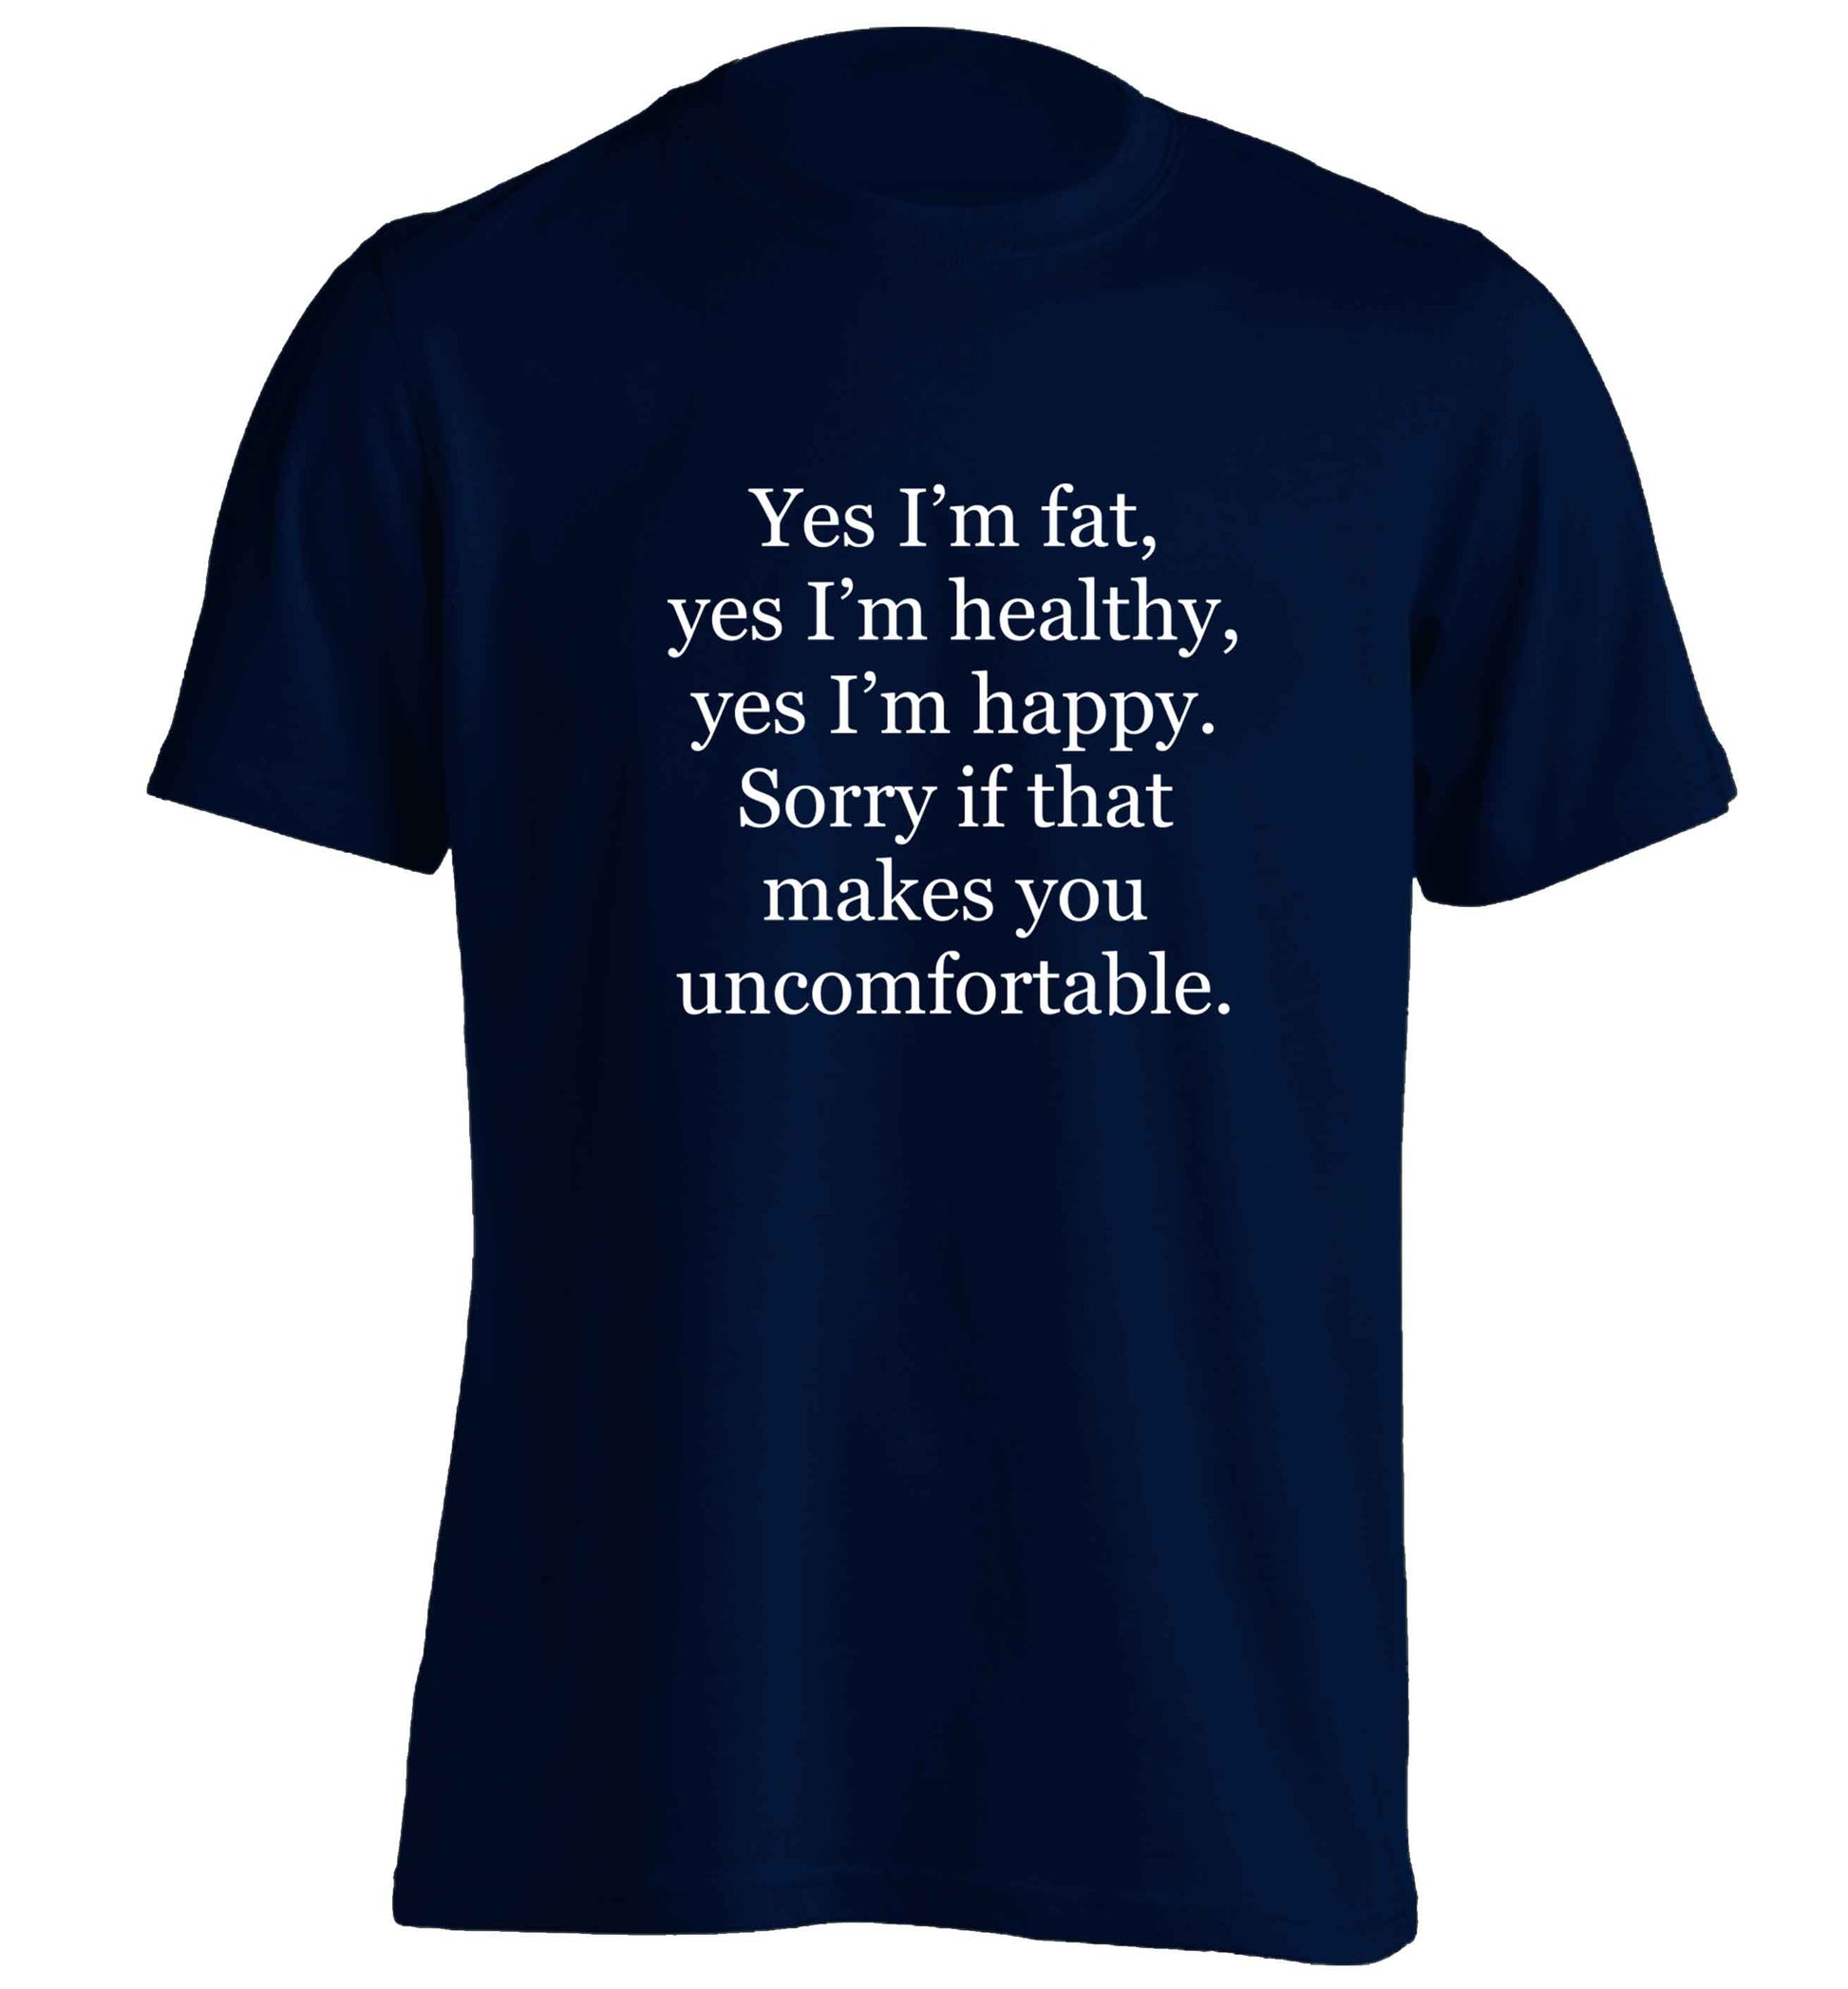 Yes I'm fat, yes I'm healthy, yes I'm happy. Sorry if that makes you uncomfortable adults unisex navy Tshirt 2XL